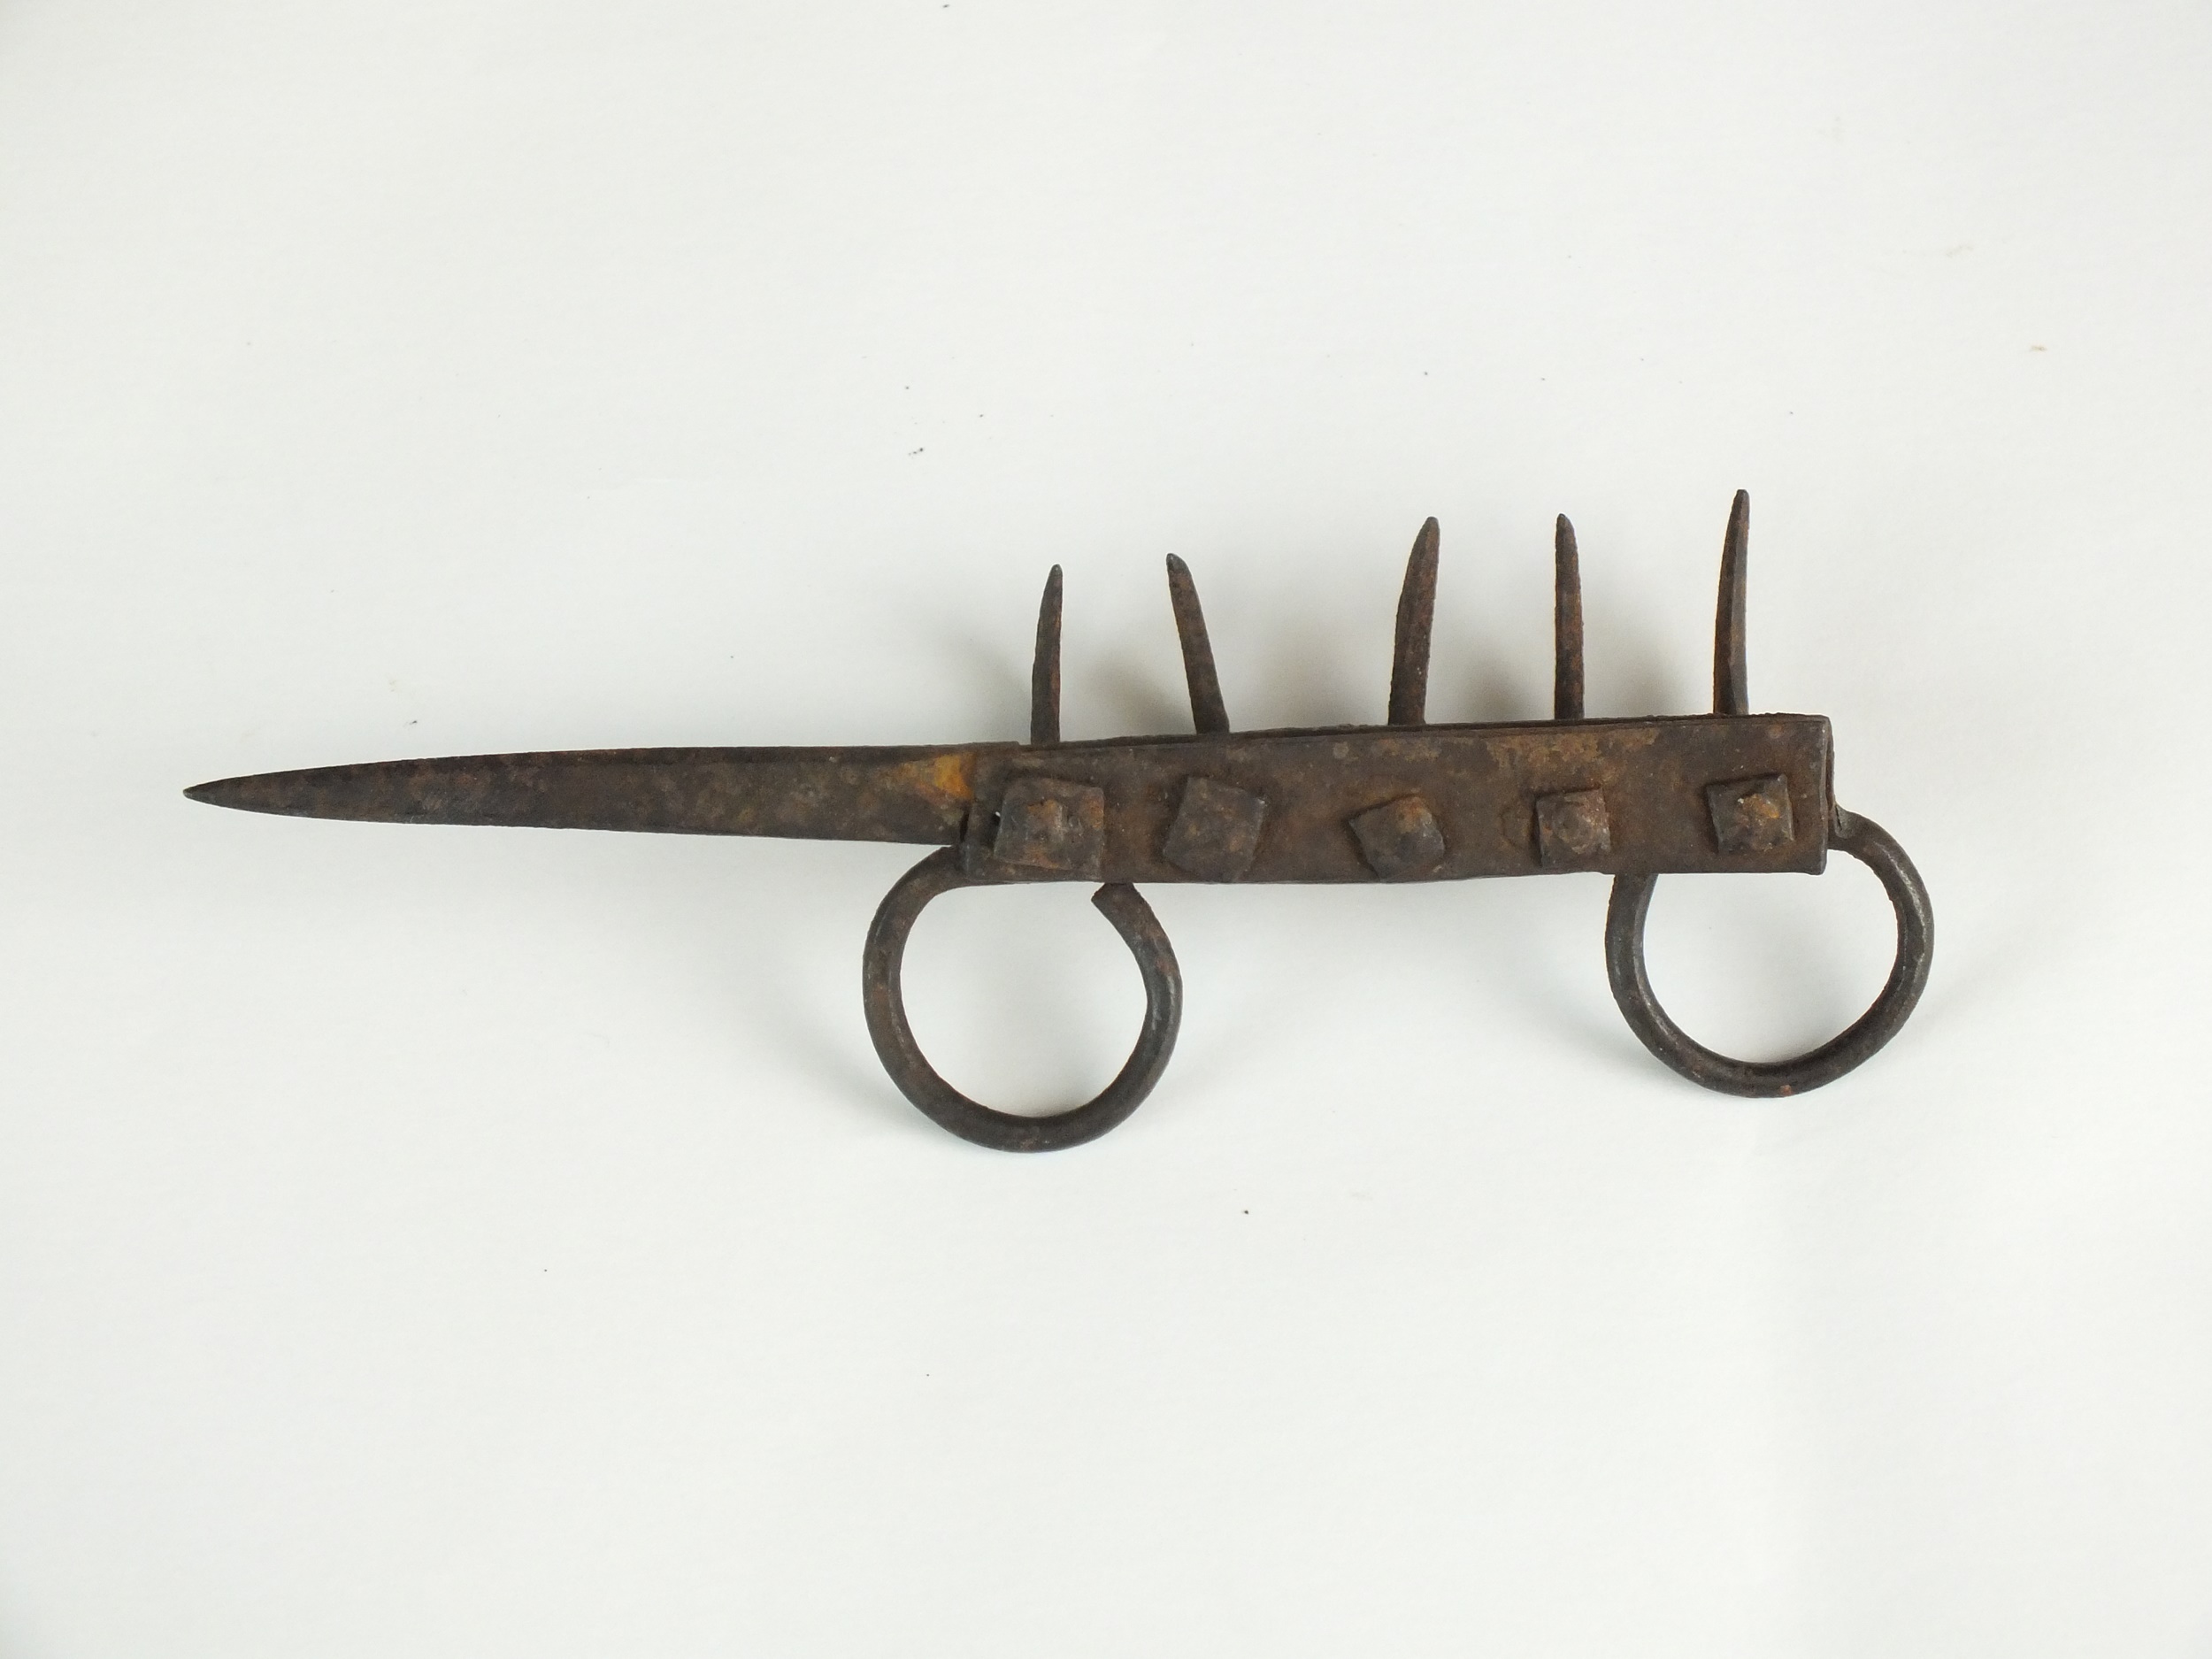 Bagh Nakh, 'Tiger's Claw', India, 1945, Online Collection